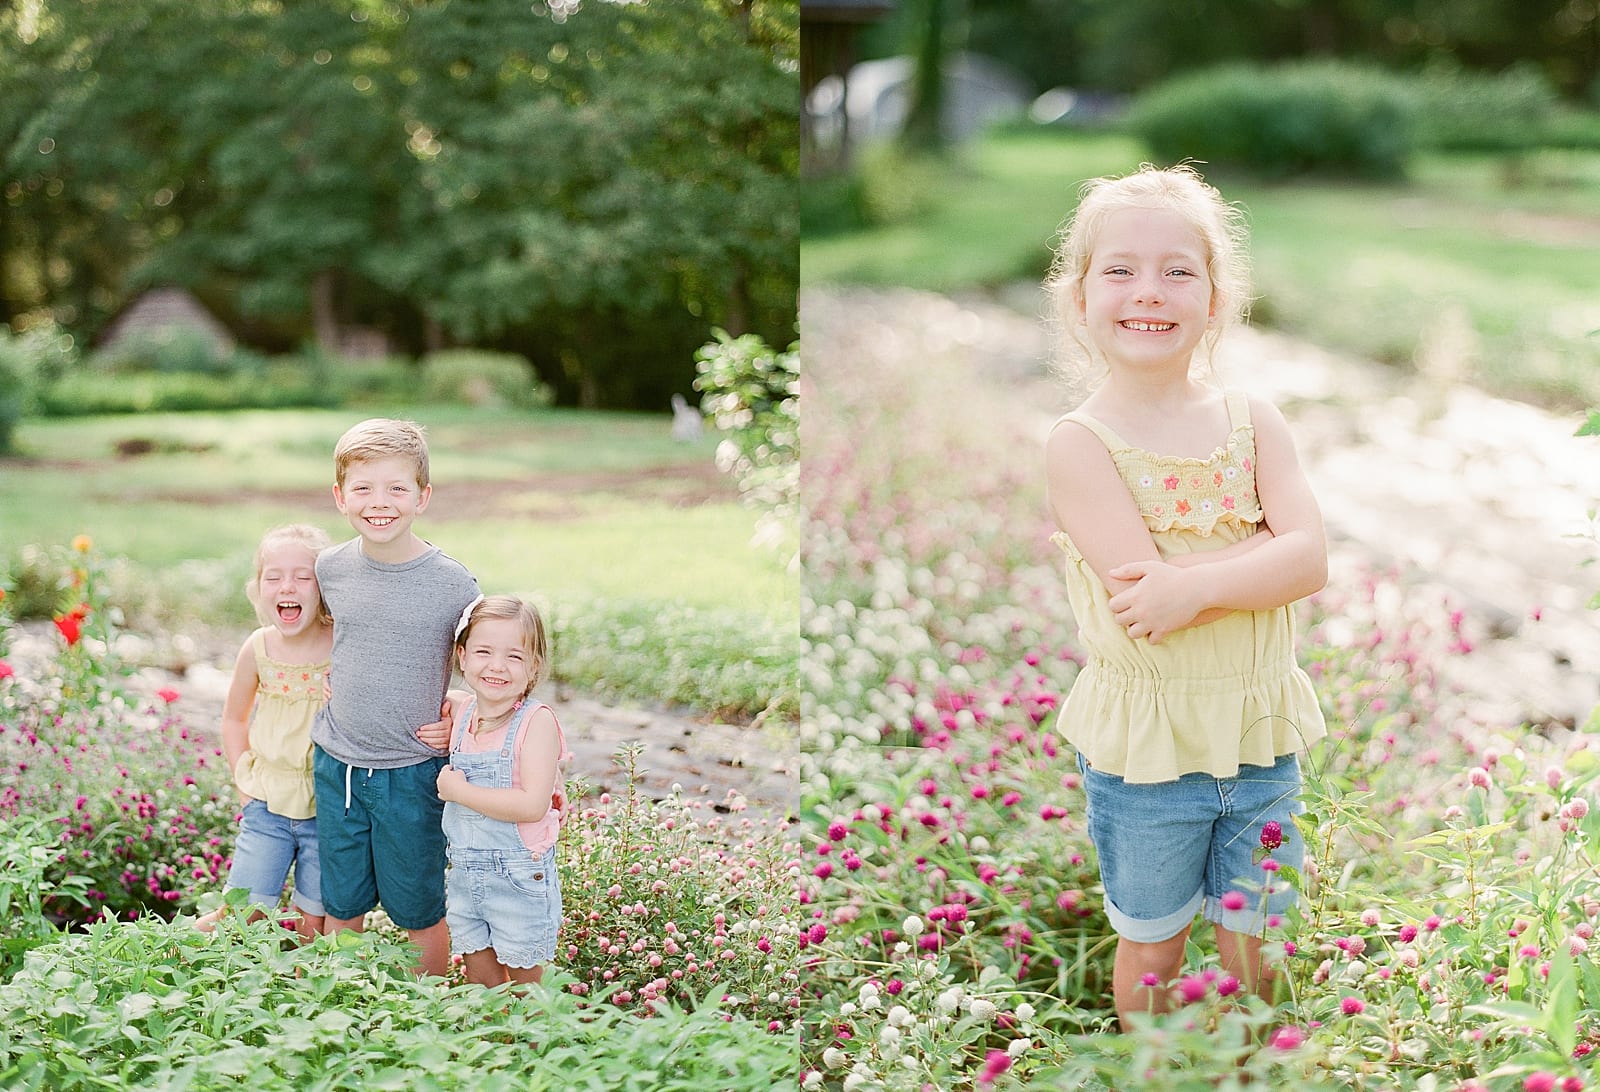 Photographing Children Kids Laughing in Flowers Photos